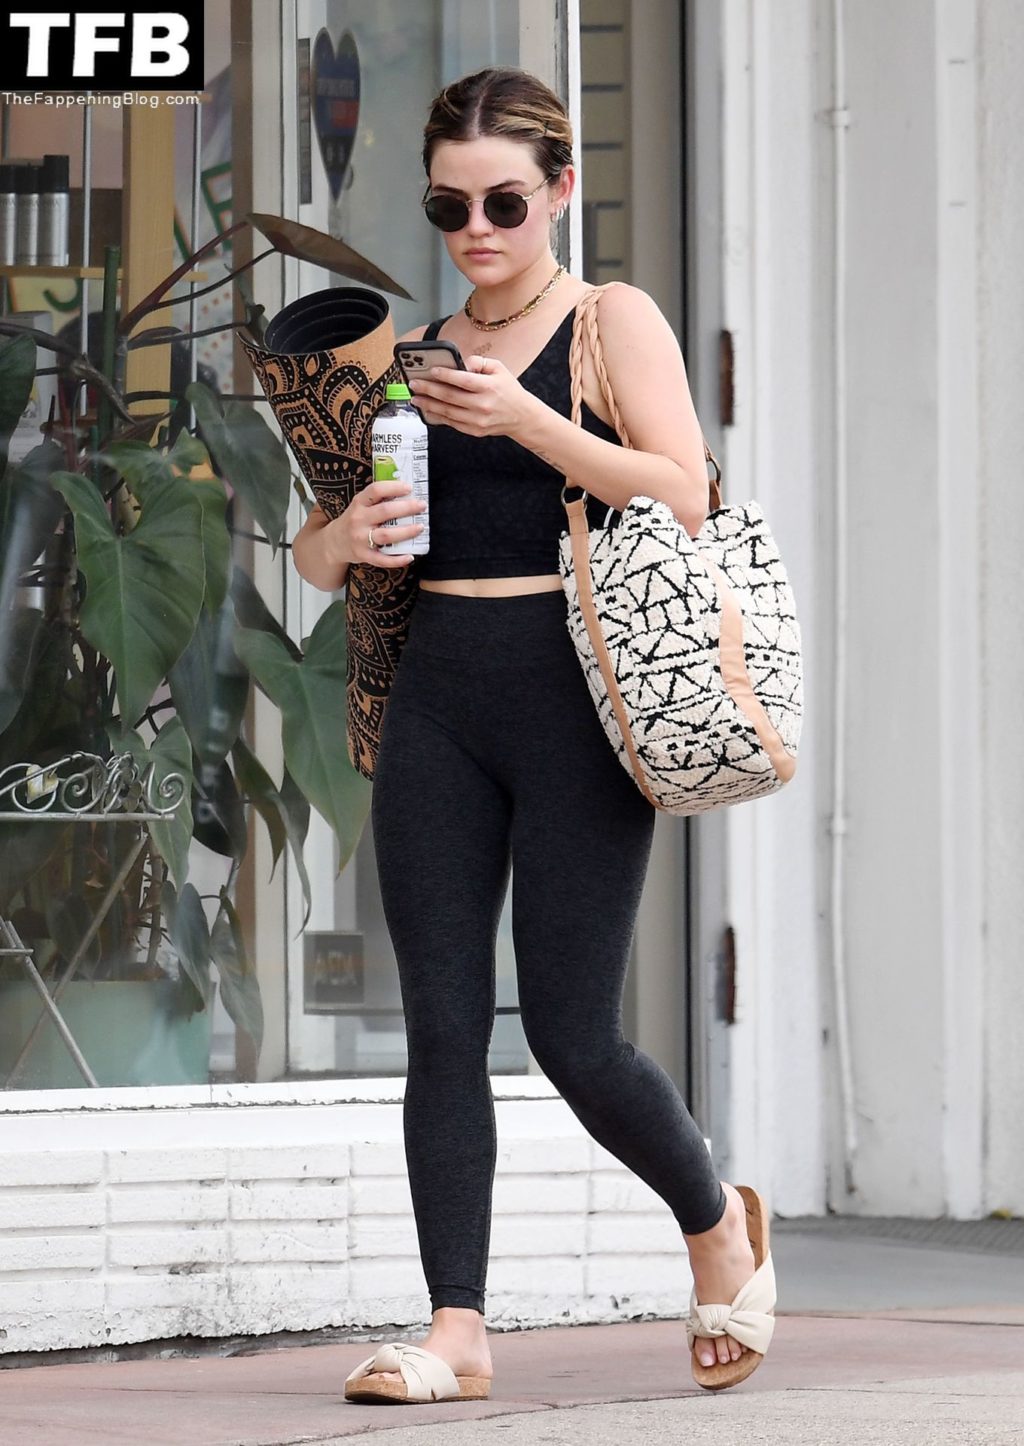 Lucy Hale Sexy Fappening Blog 27 1024x1446 - Lucy Hale Takes a Hot Yoga Class in LA (50 Photos)